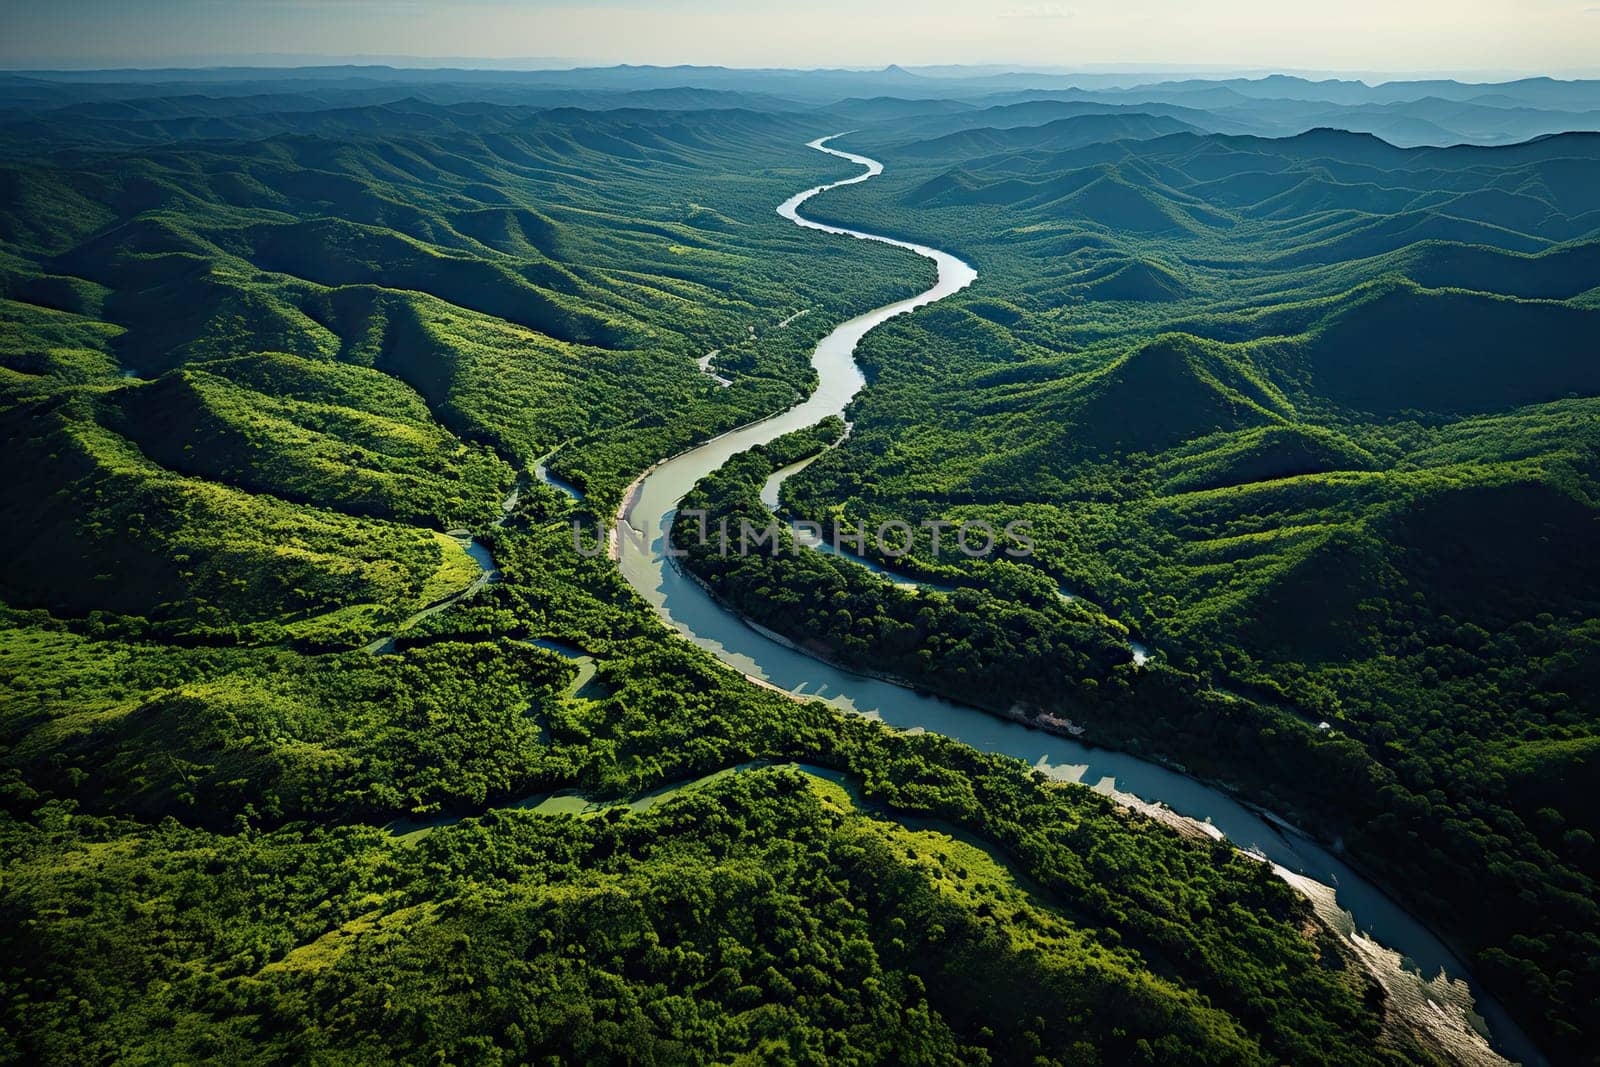 A Serene Journey Through the Verdant Beauty of a Majestic River